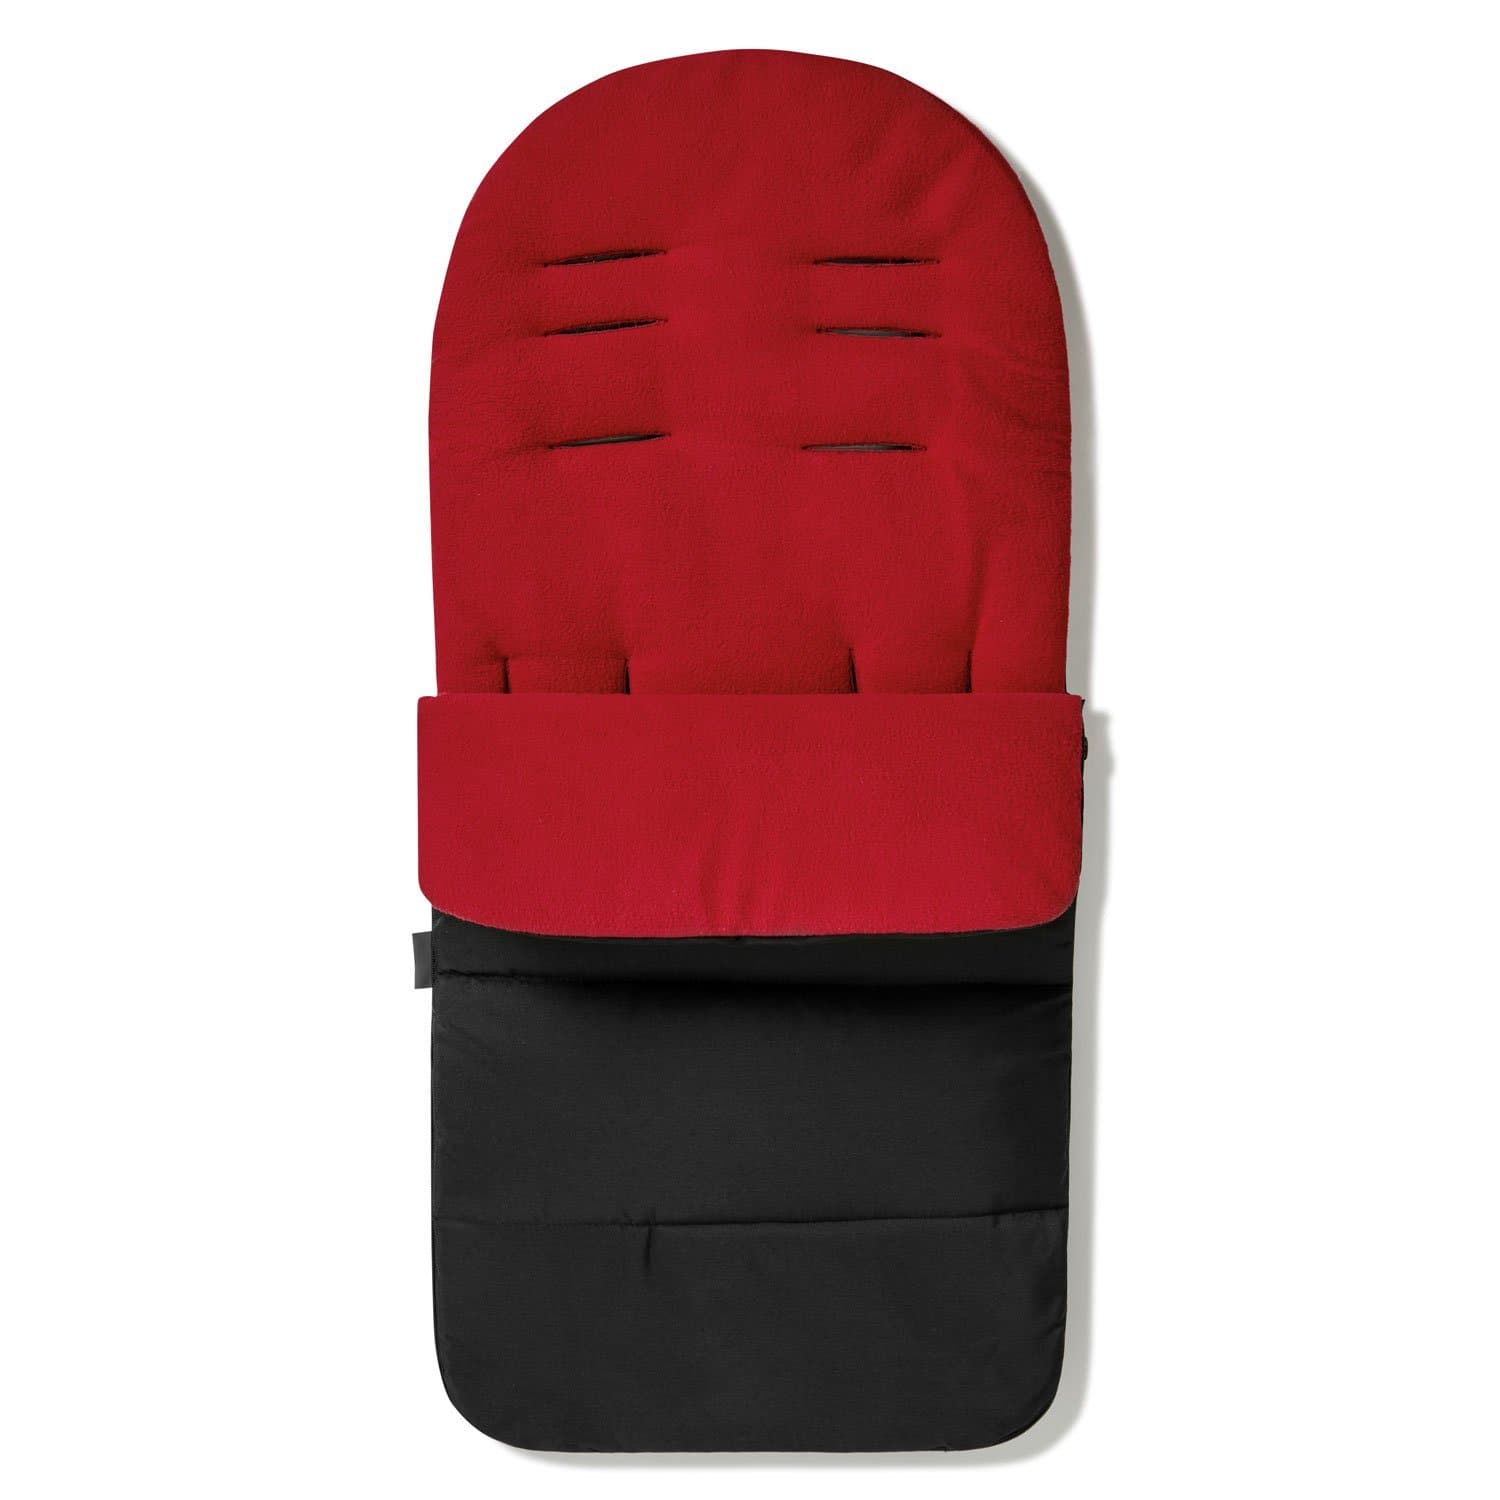 Premium Footmuff / Cosy Toes Compatible with Zeta - Fire Red / Fits All Models | For Your Little One